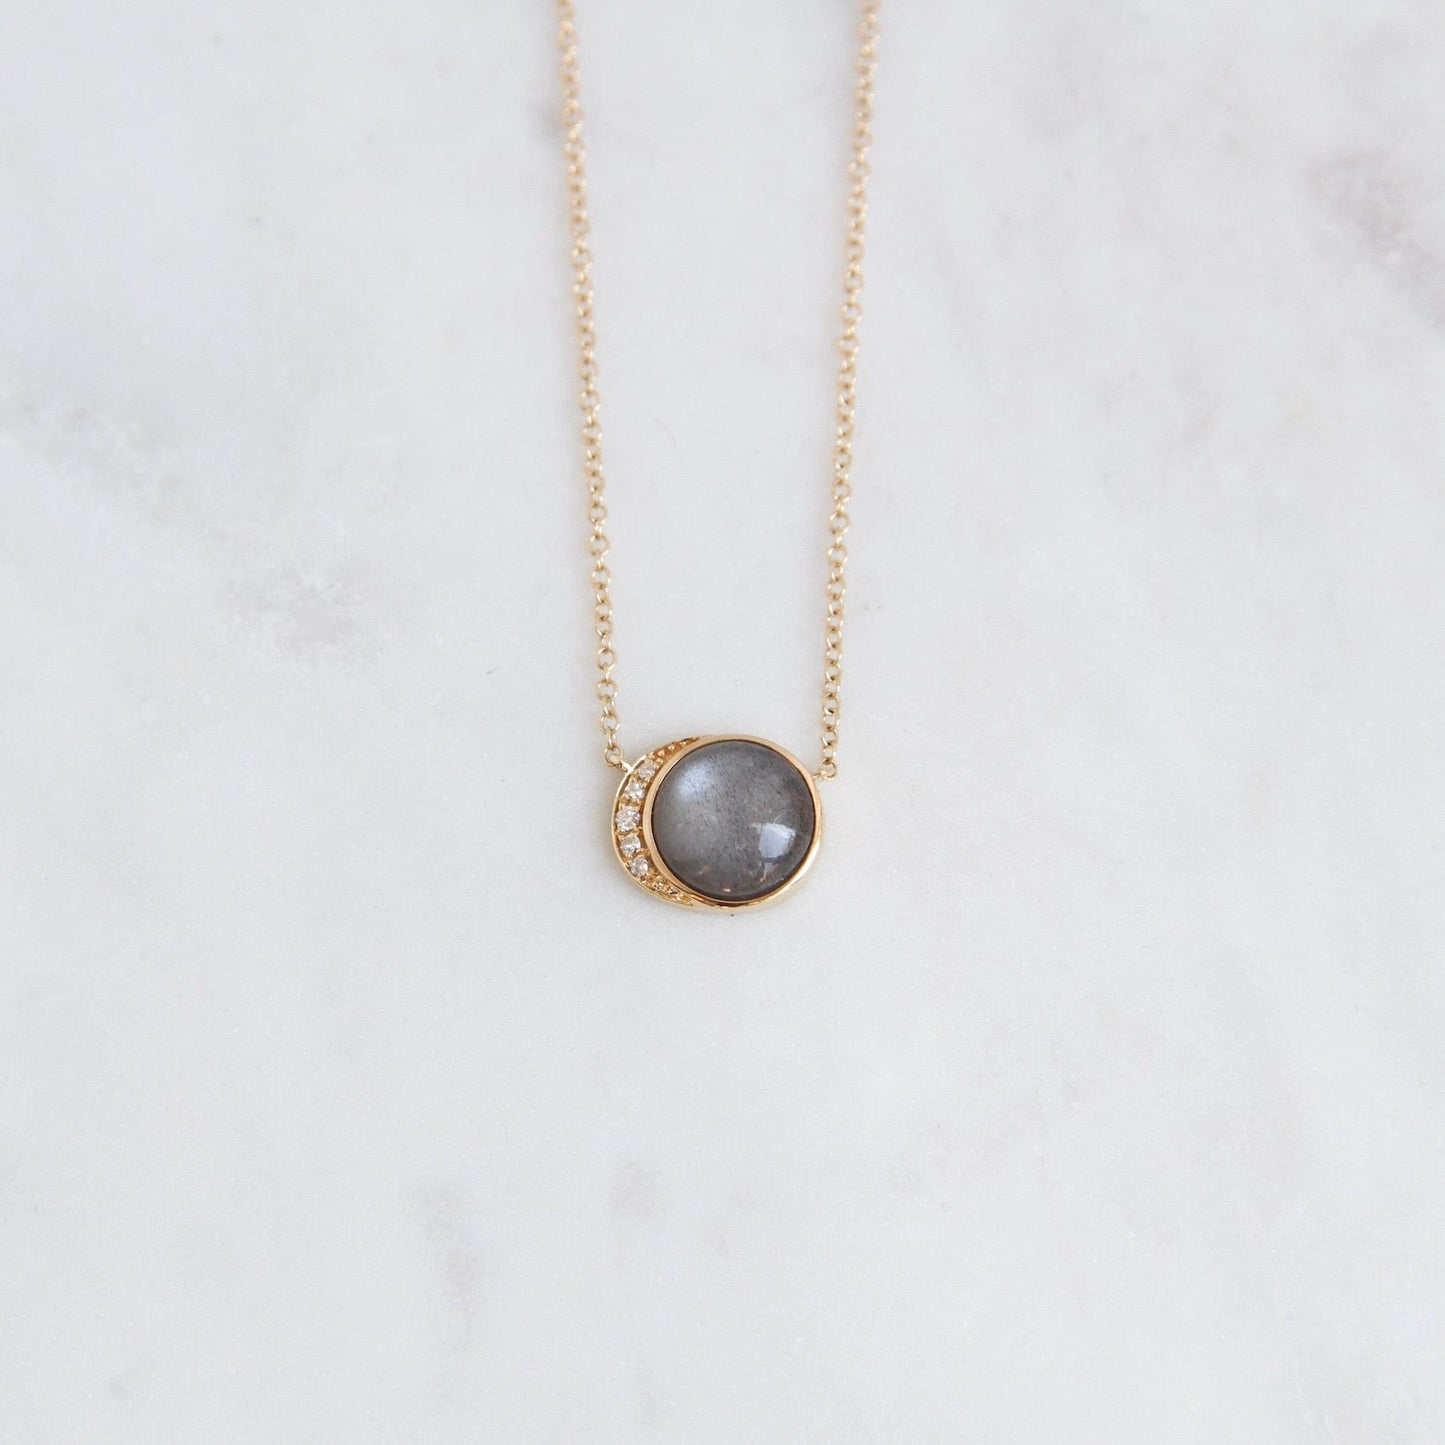 NKL-14K 14k Yellow Gold Moon Phase Necklace with Bezel Set Grey Moonstone